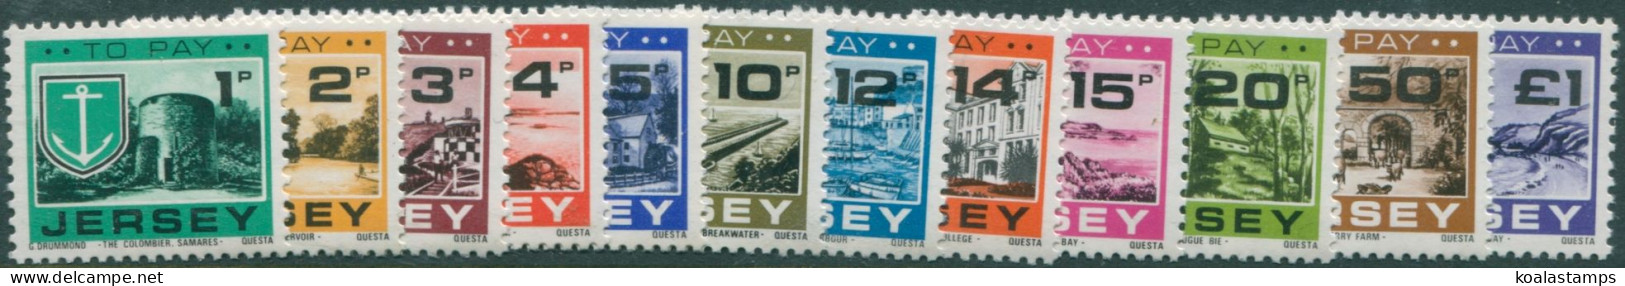 Jersey Due 1978 SGD21-D32 Postage Due Set MNH - Jersey